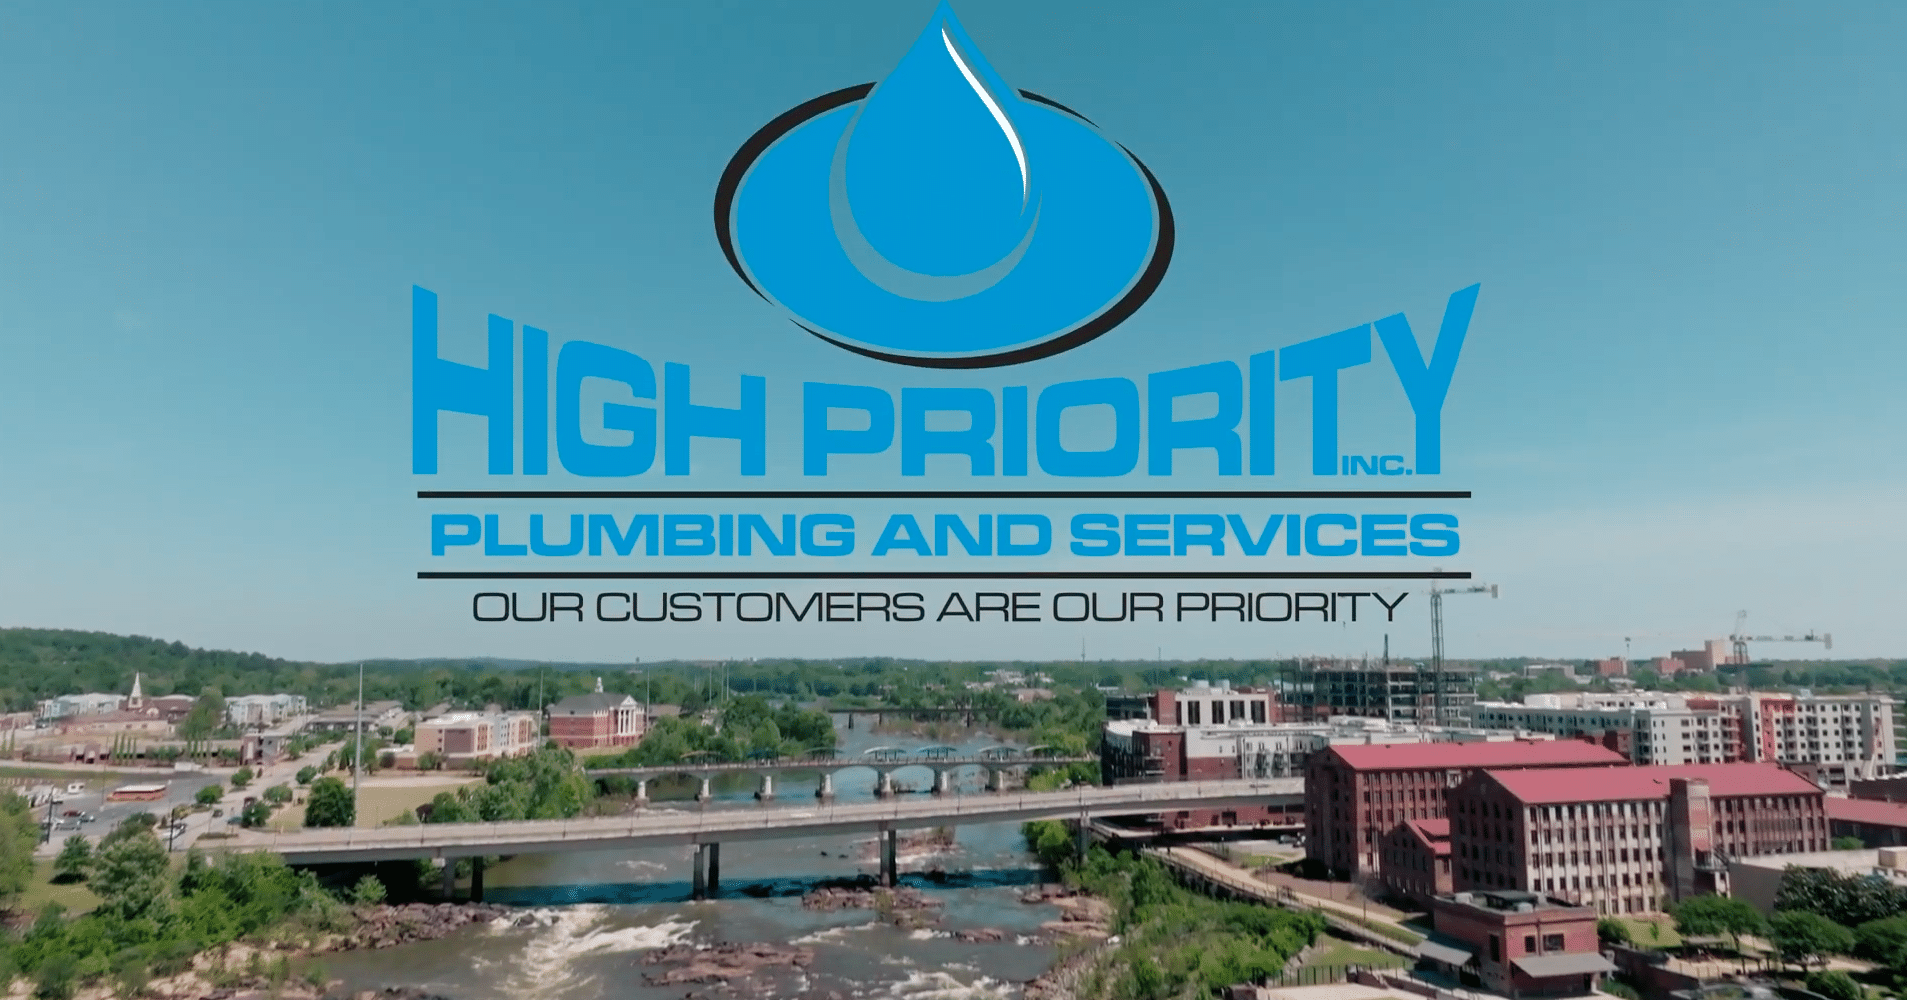 High Priority Plumbing and Services, Inc - Columbus GA